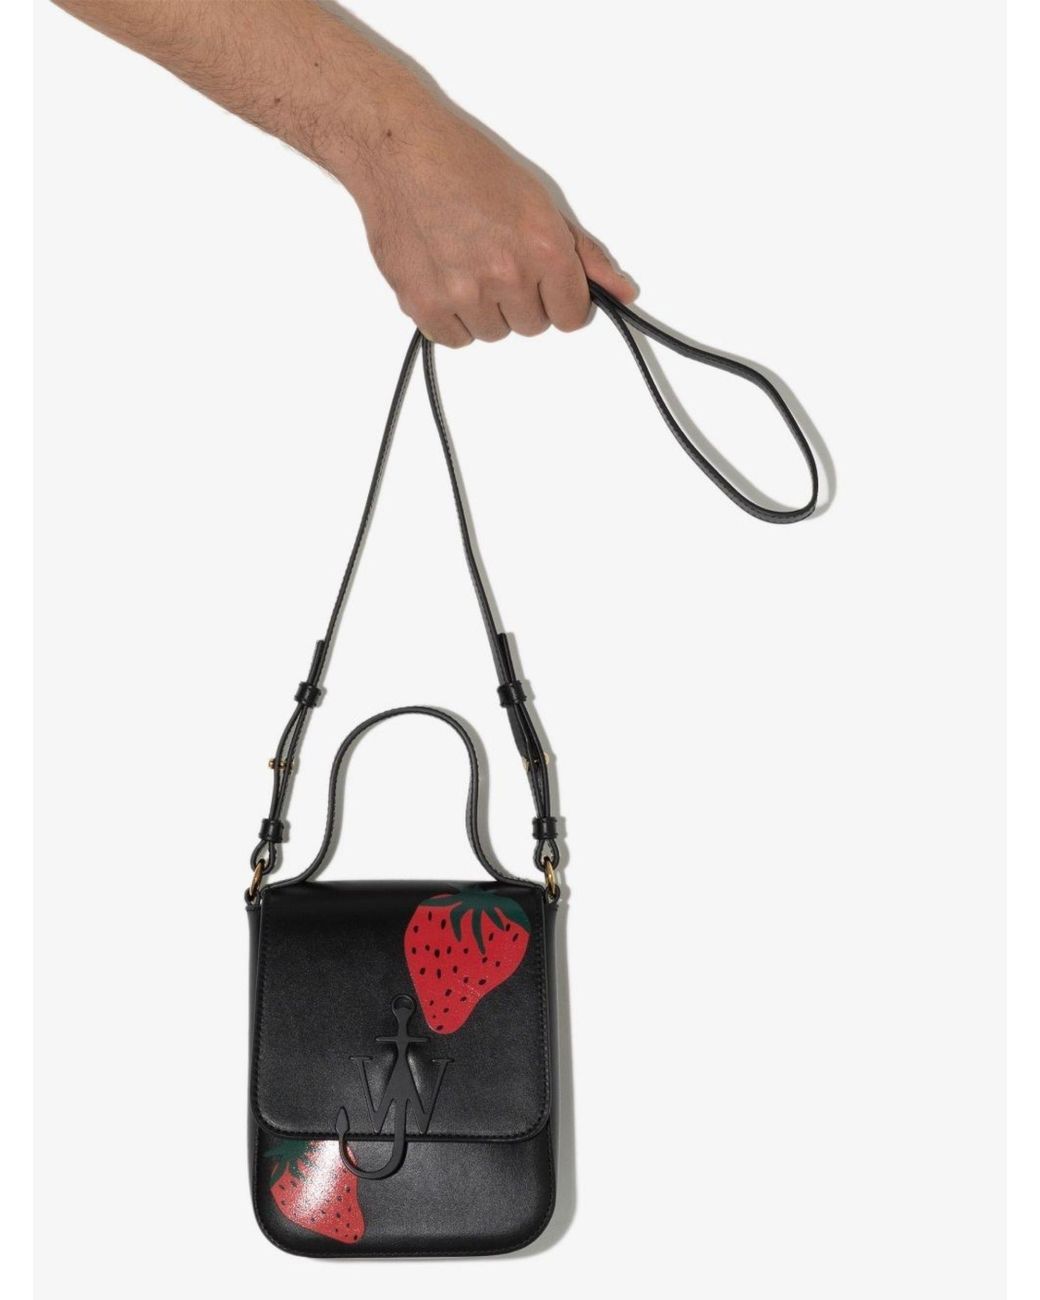 JW Anderson Strawberry Print Leather Cross Body Bag in Black | Lyst